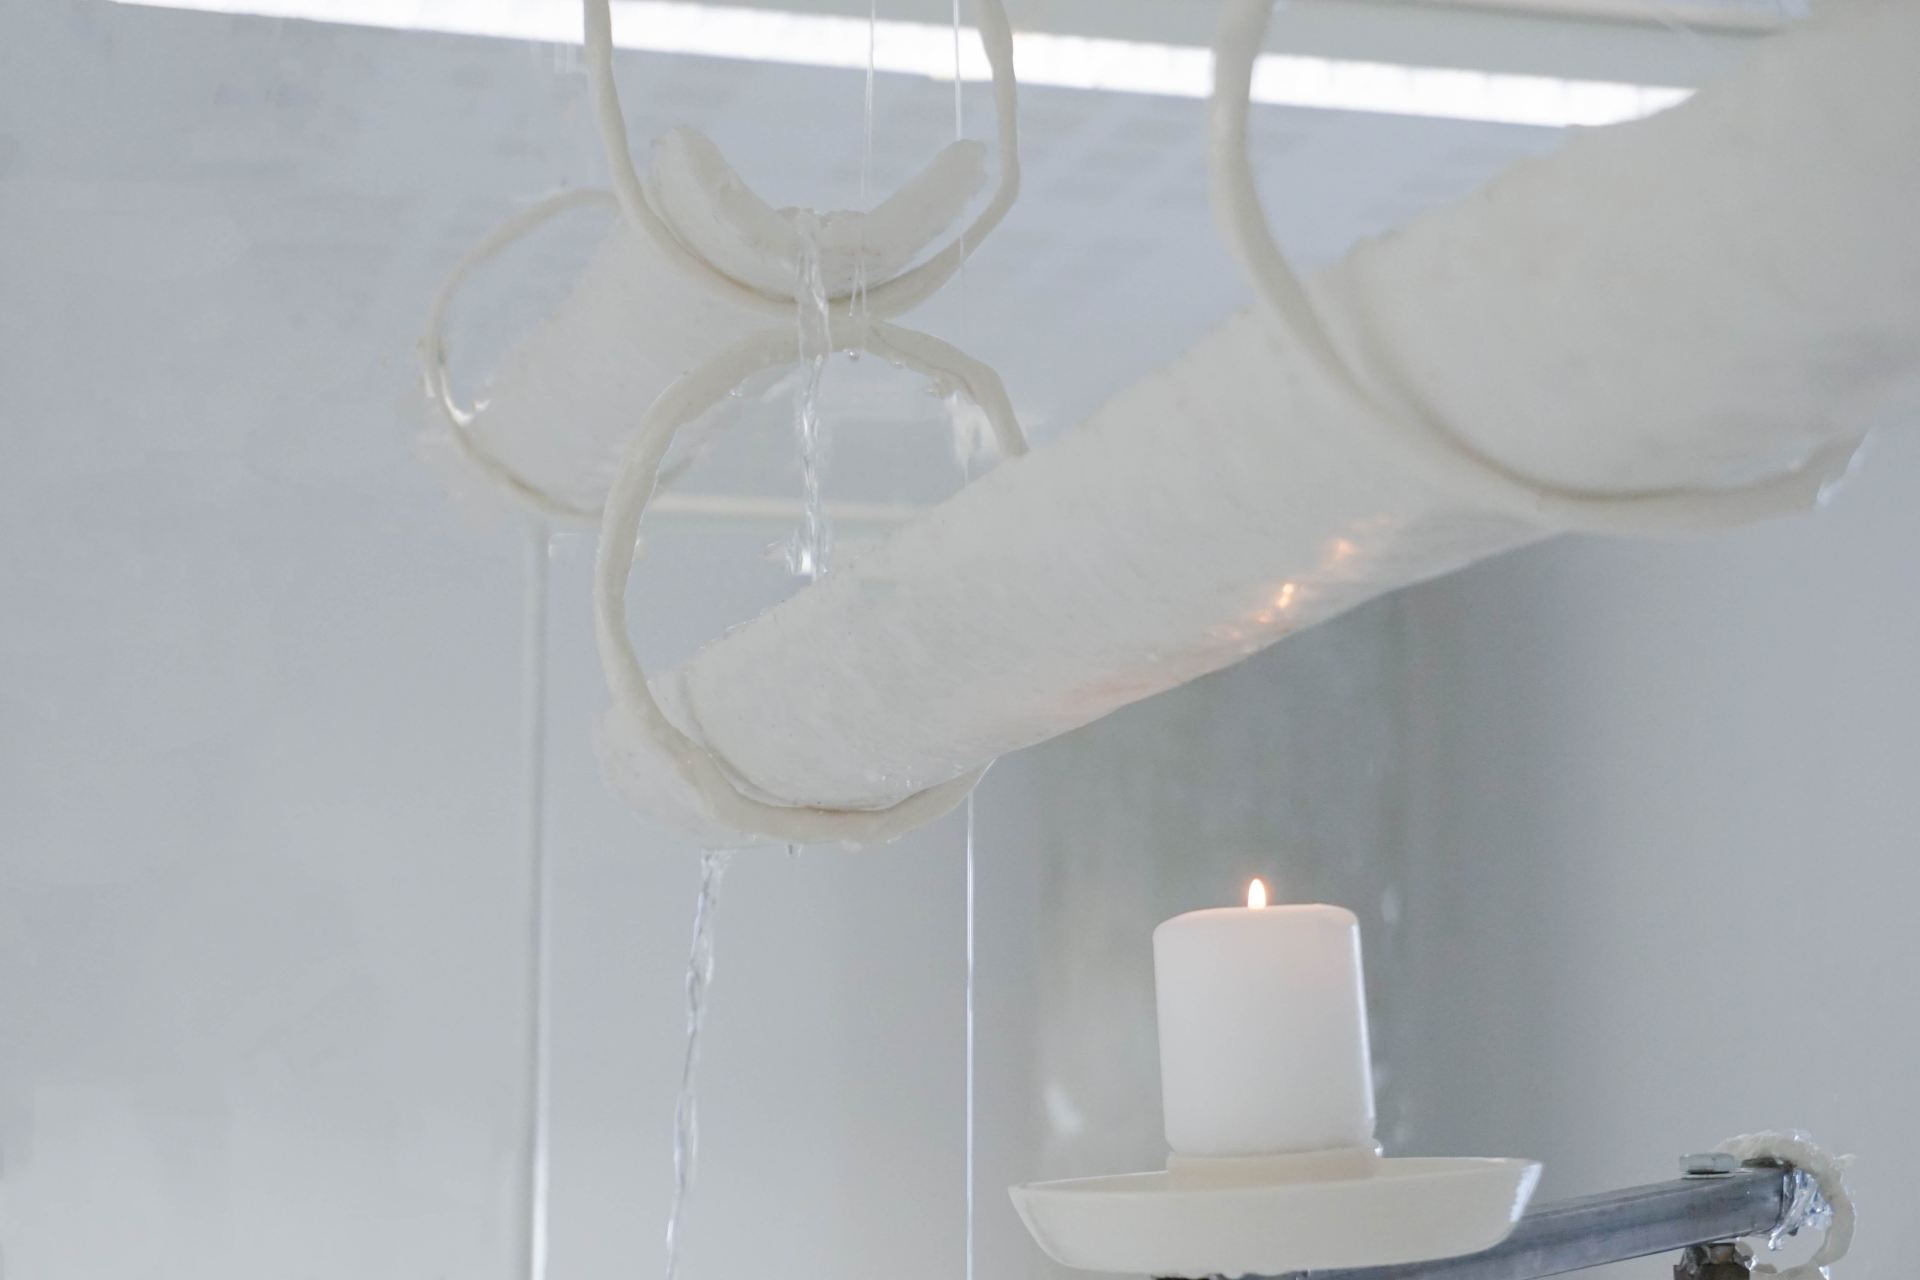 A detail shot of a sculptural water feature made using wax tubes standing in a white room.